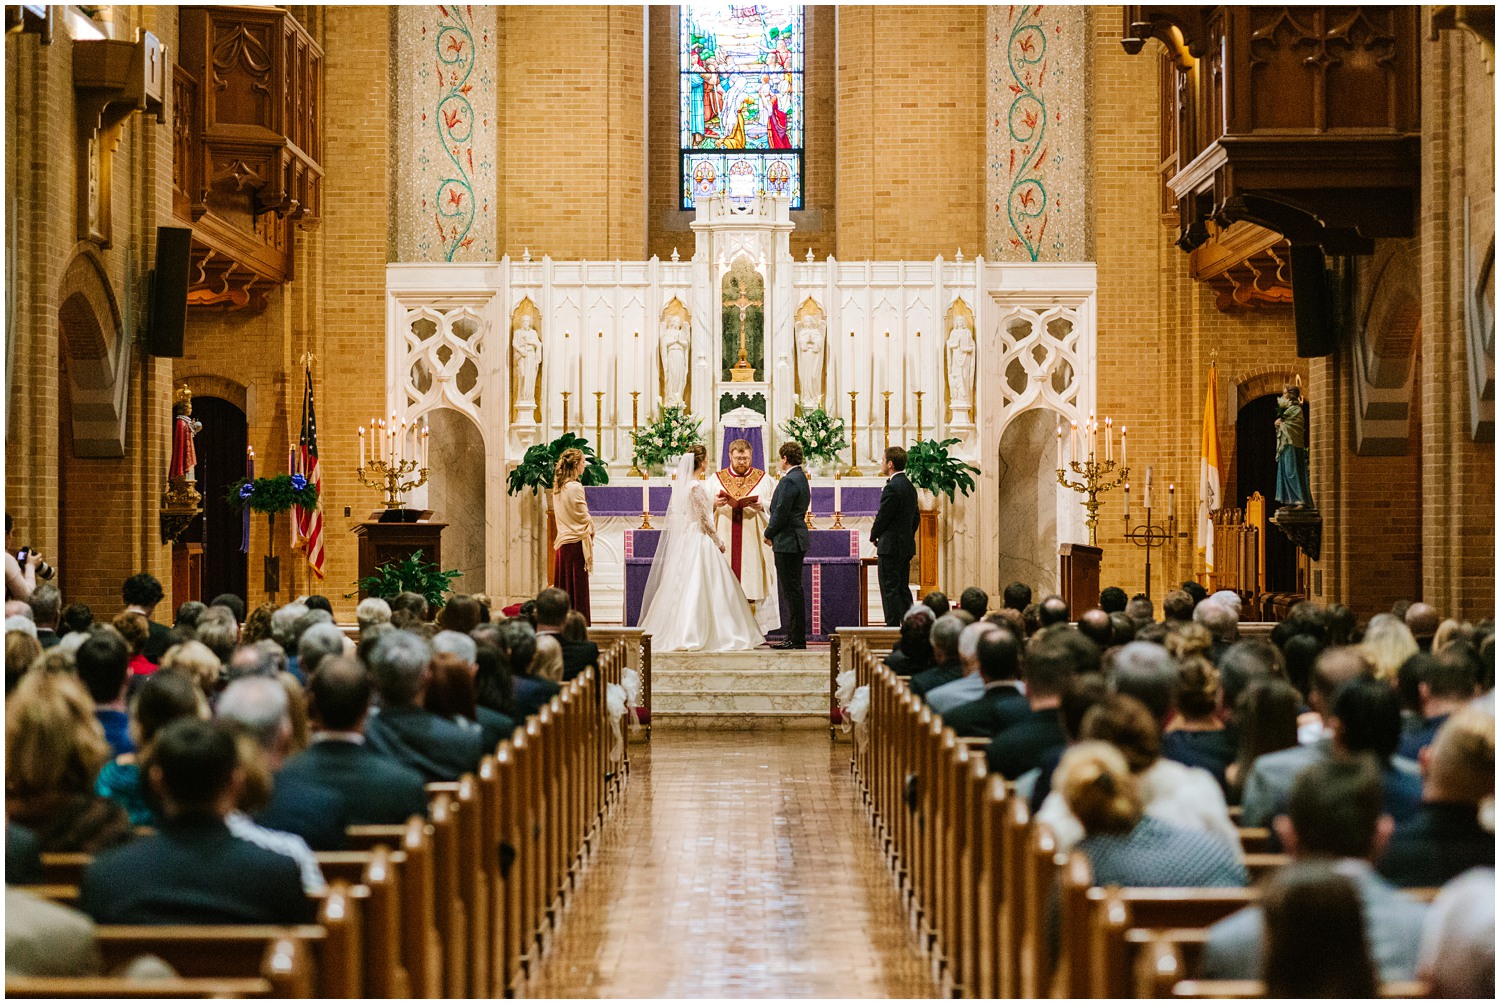 traditional church wedding in North Carolina photographed by Chelsea Renay Photography